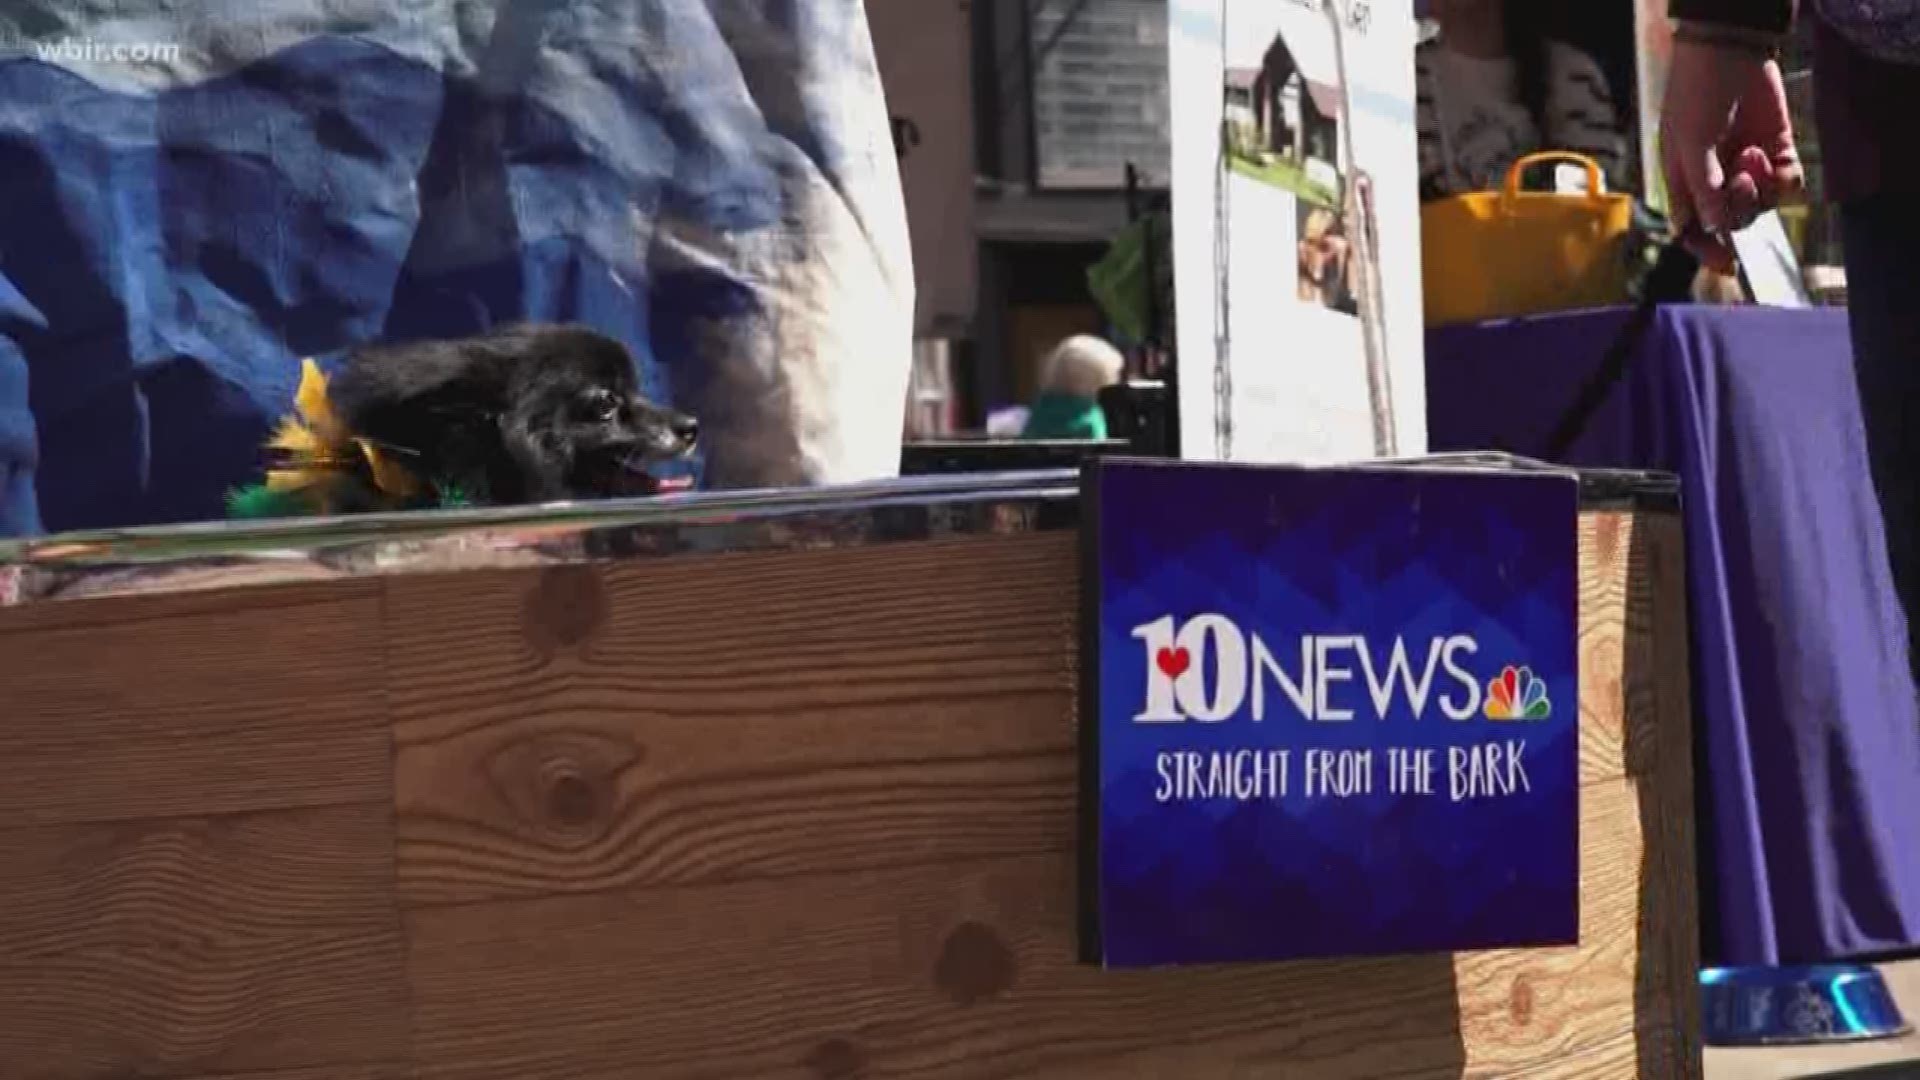 Hundreds of a dog were on the prowl Saturday in Downtown Knoxville!